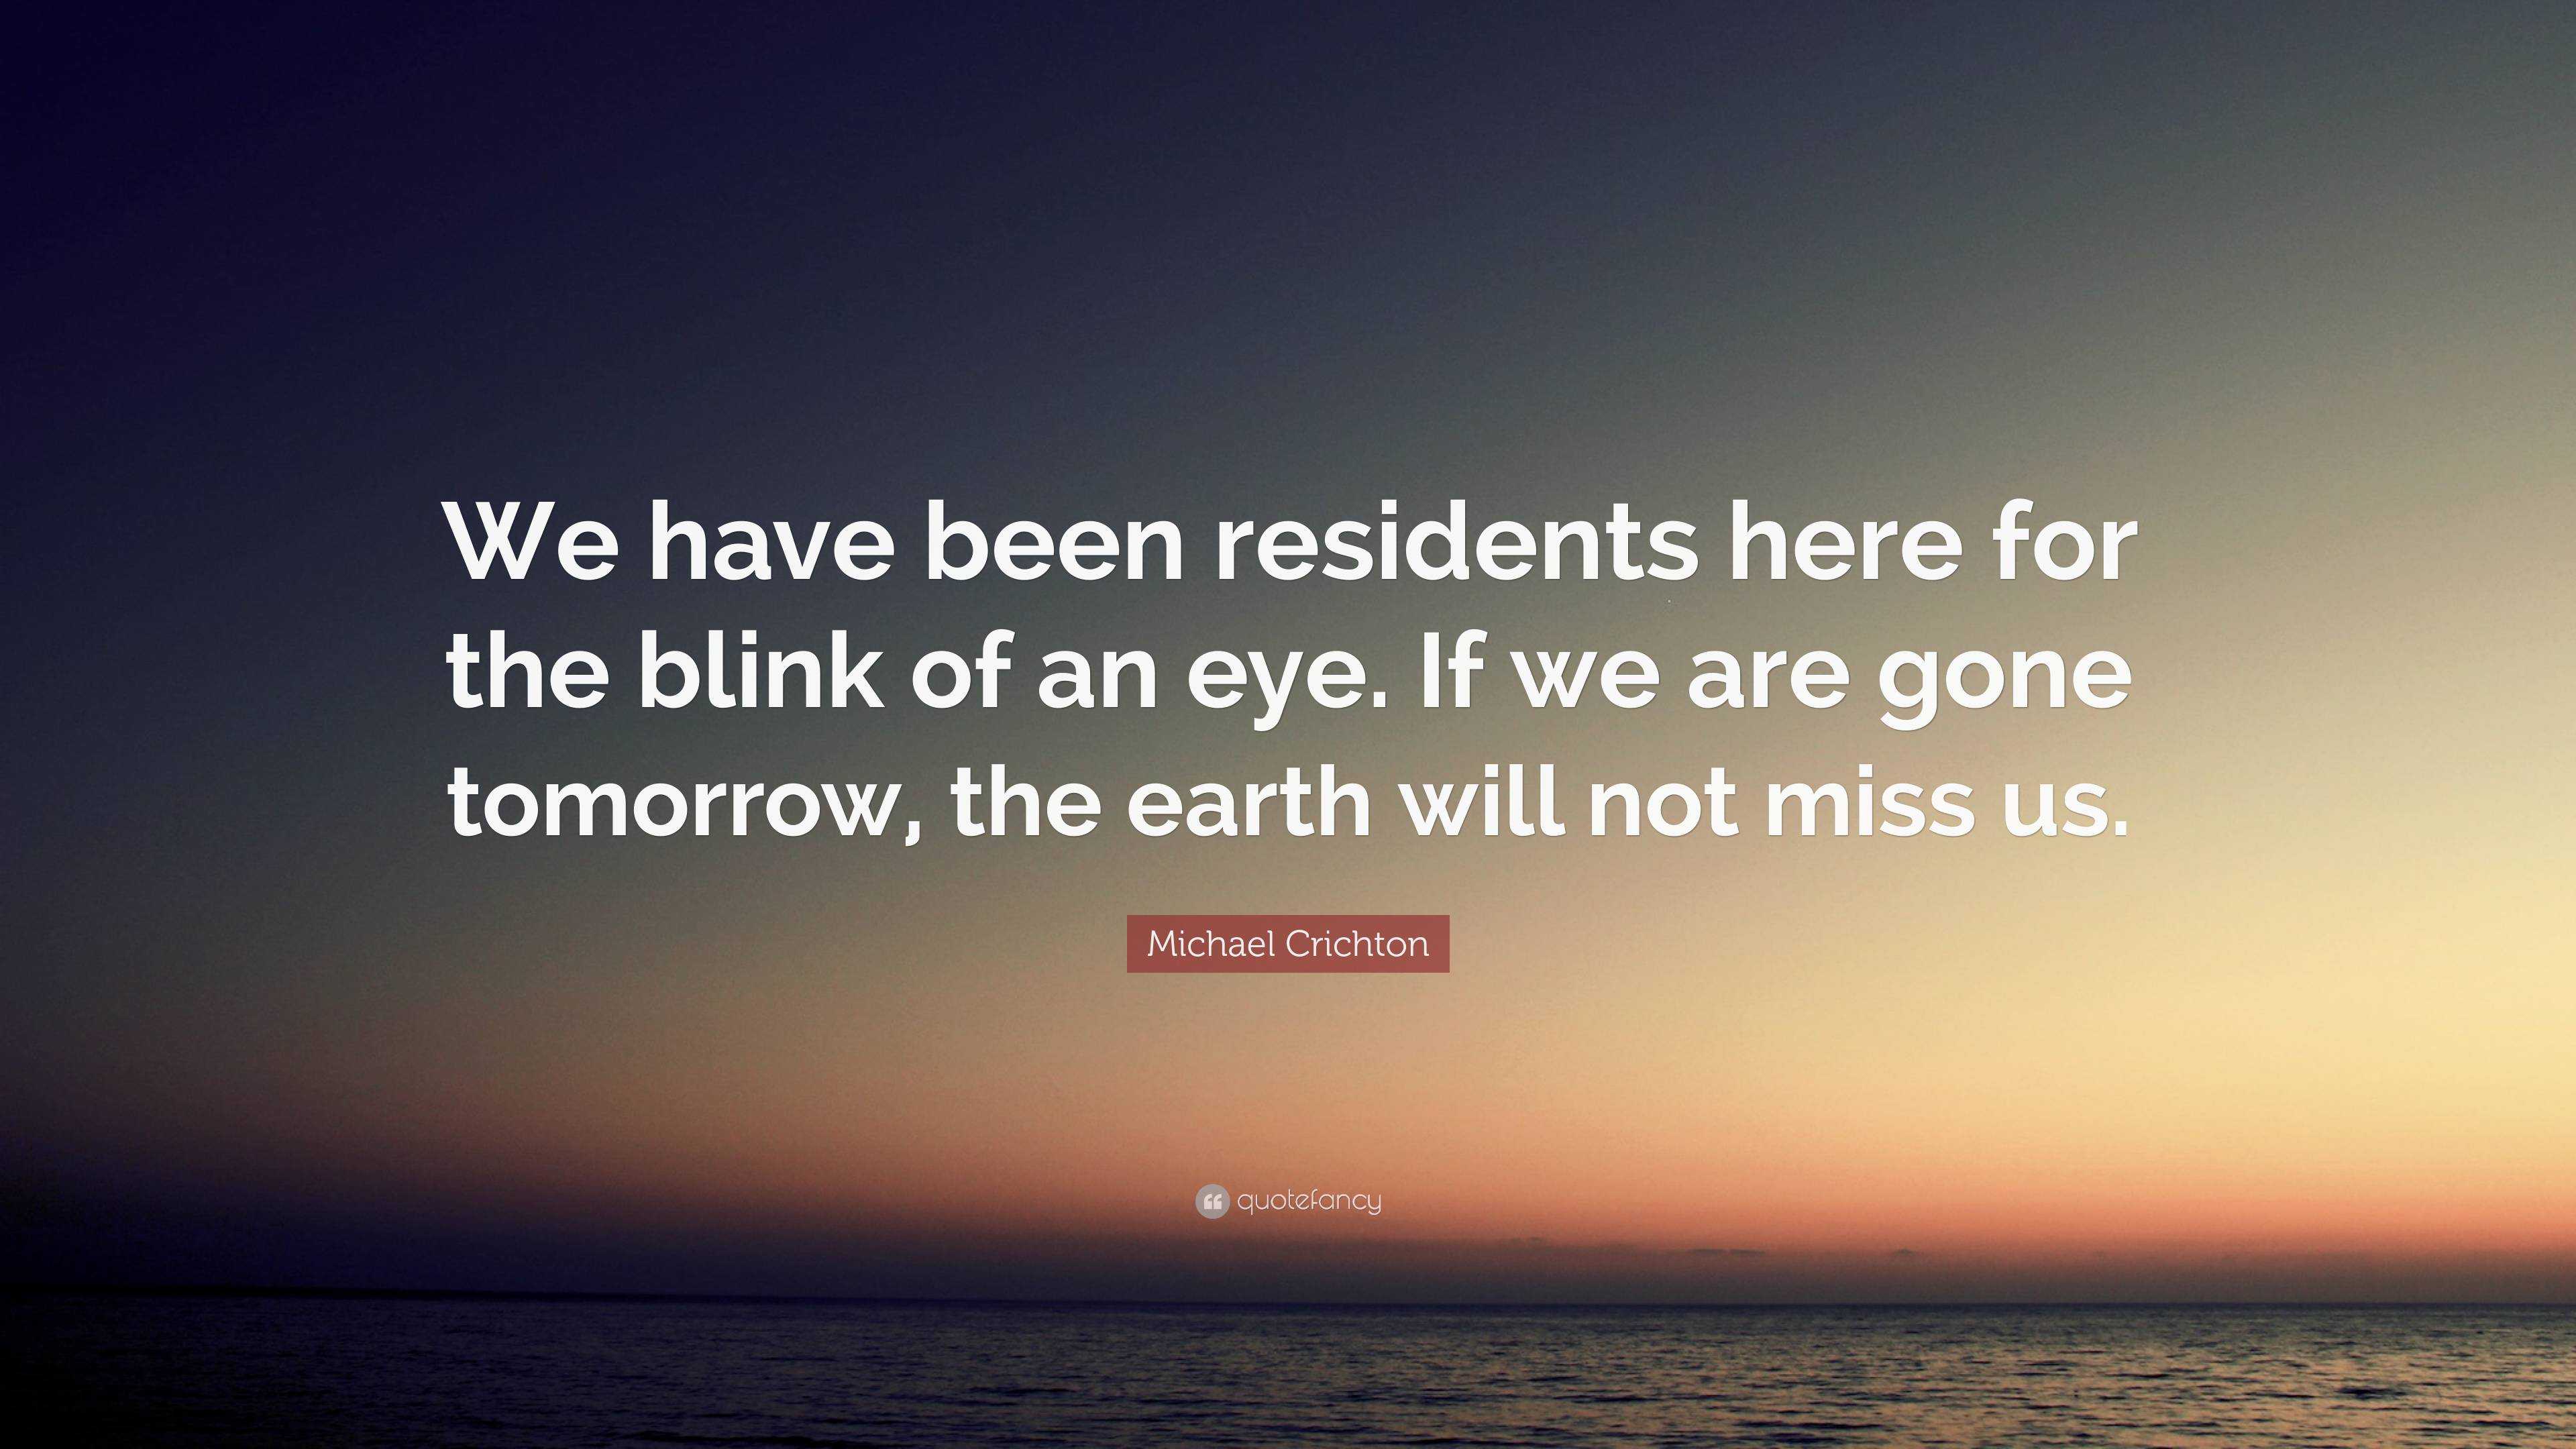 Michael Crichton Quote We Have Been Residents Here For The Blink Of An Eye If We